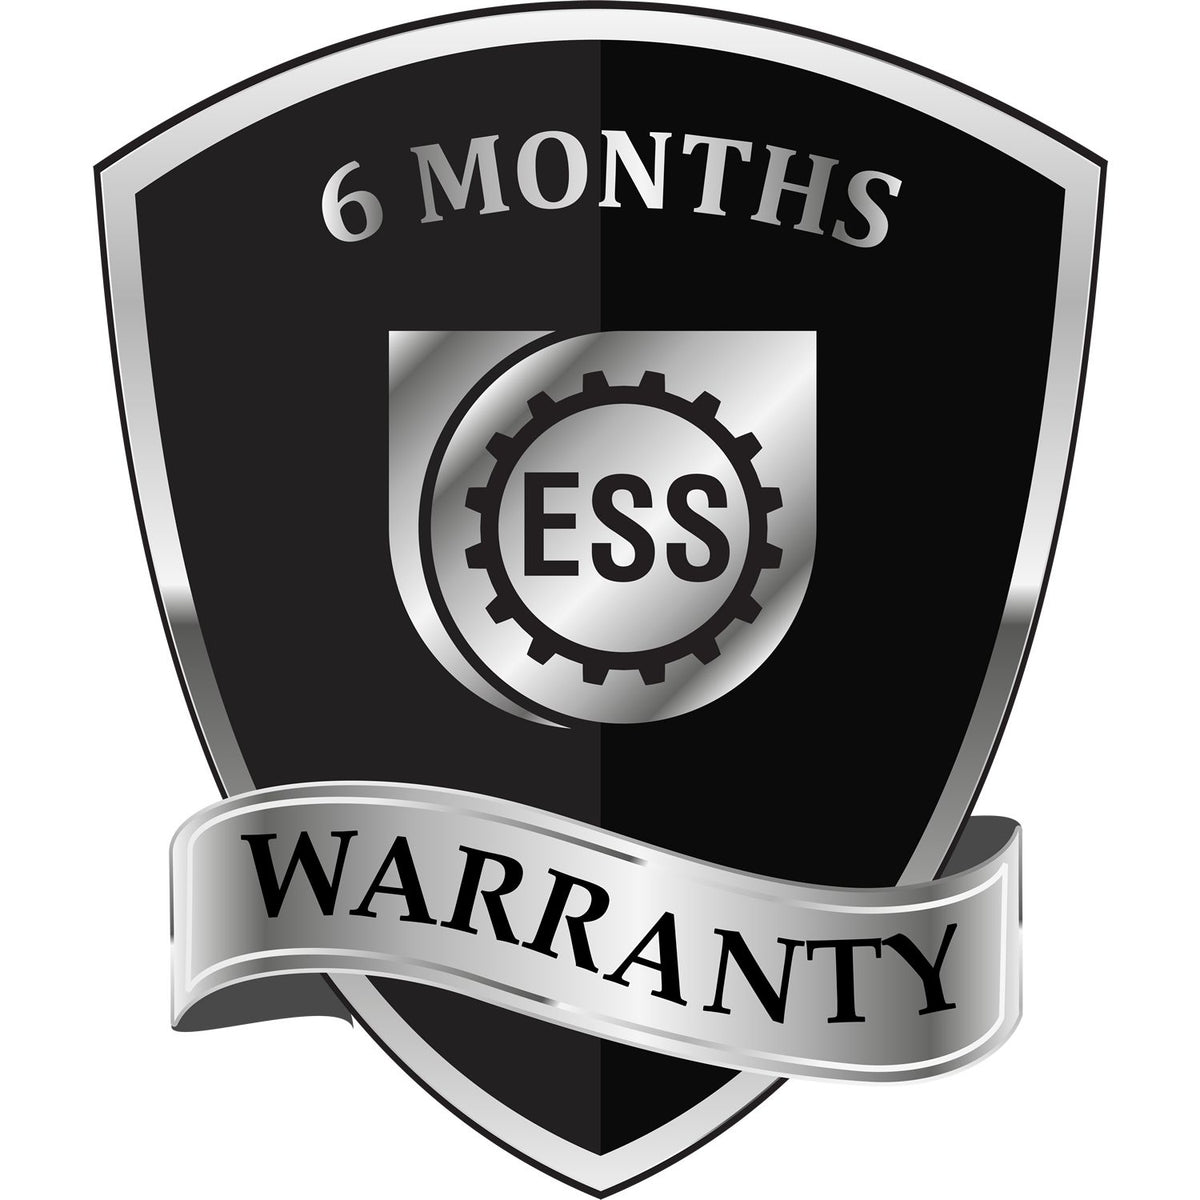 Temporarily Away Rubber Stamp 4758R 6 Month Warranty